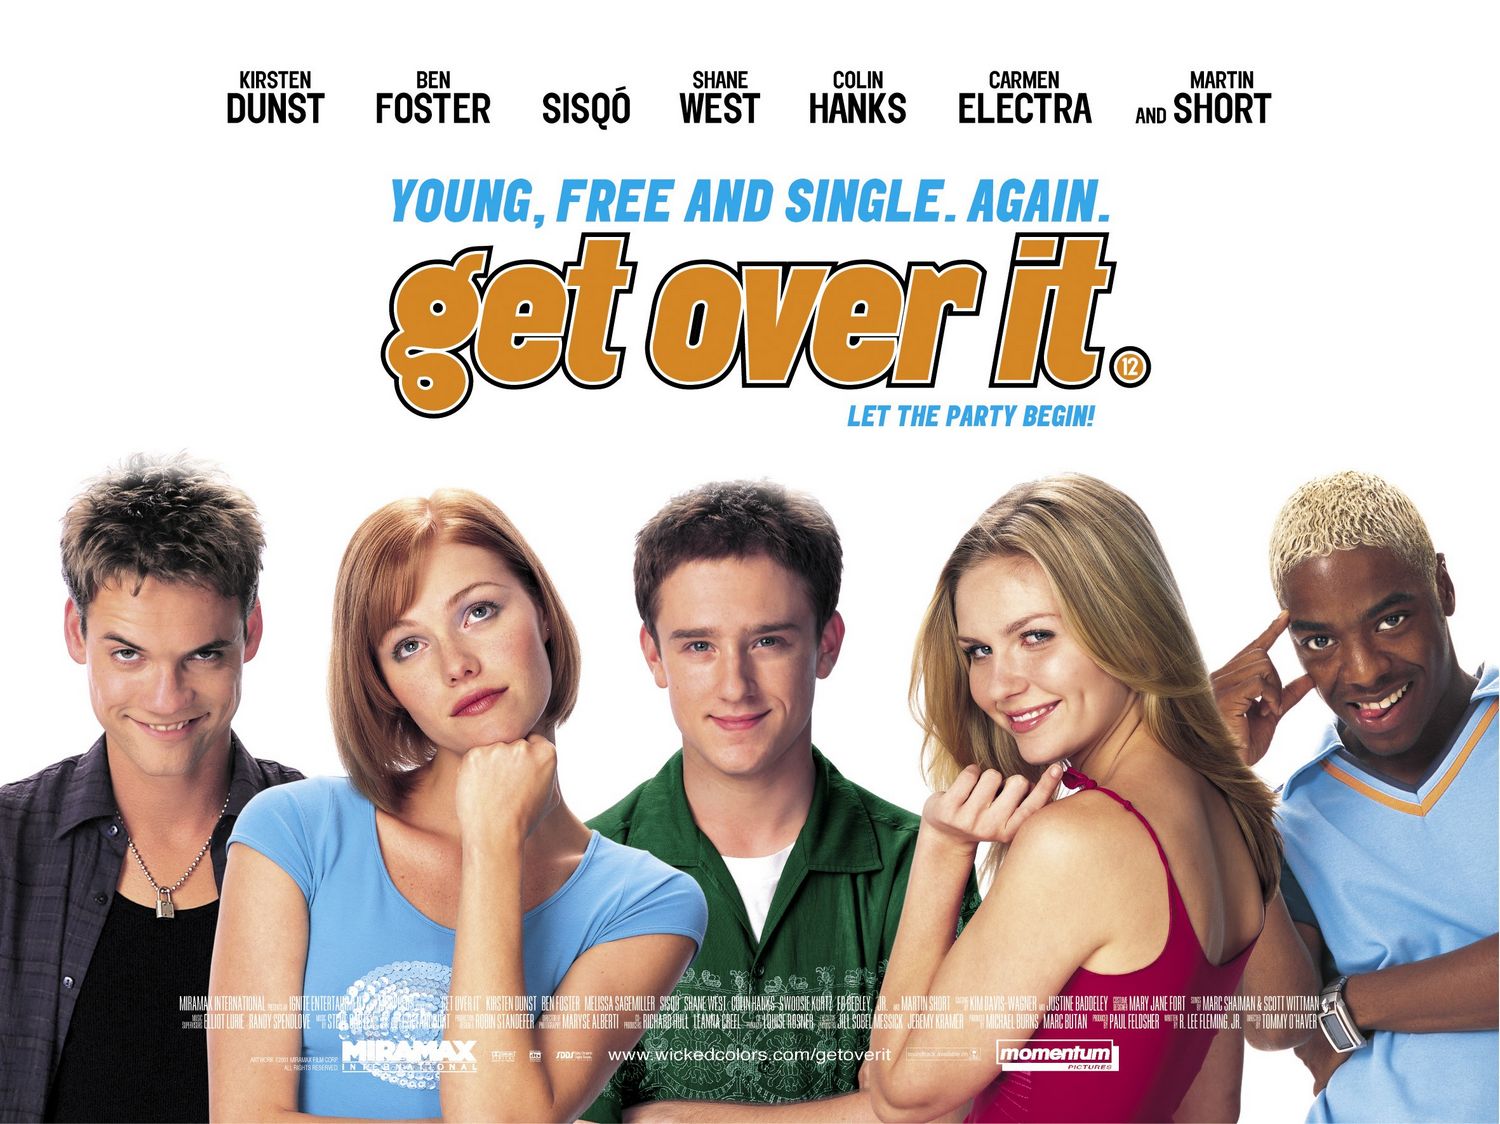 Original Film Title: GET OVER IT. English Title: GET OVER IT. Film  Director: TOMMY O'HAVER. Year: 2001. Stars: KIRSTEN DUNST; MILA KUNIS.  Copyright: Editorial inside use only. This is a publicly distributed